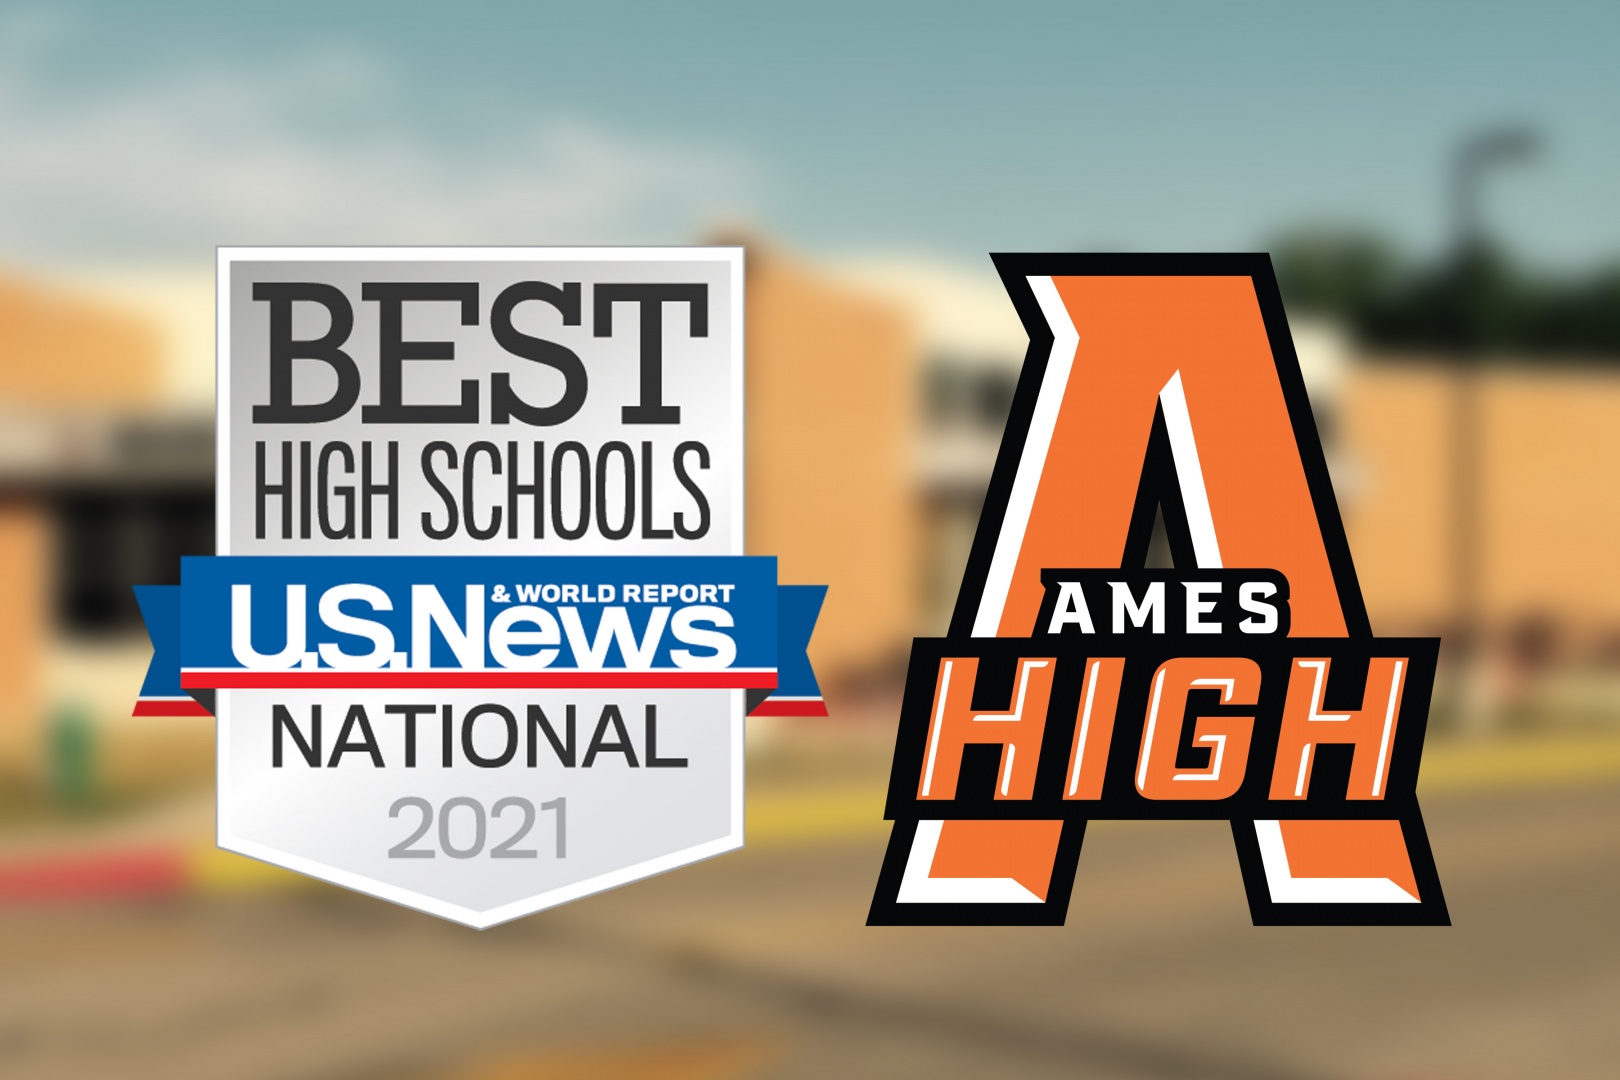 Ames High Named “Best” High School in National Report